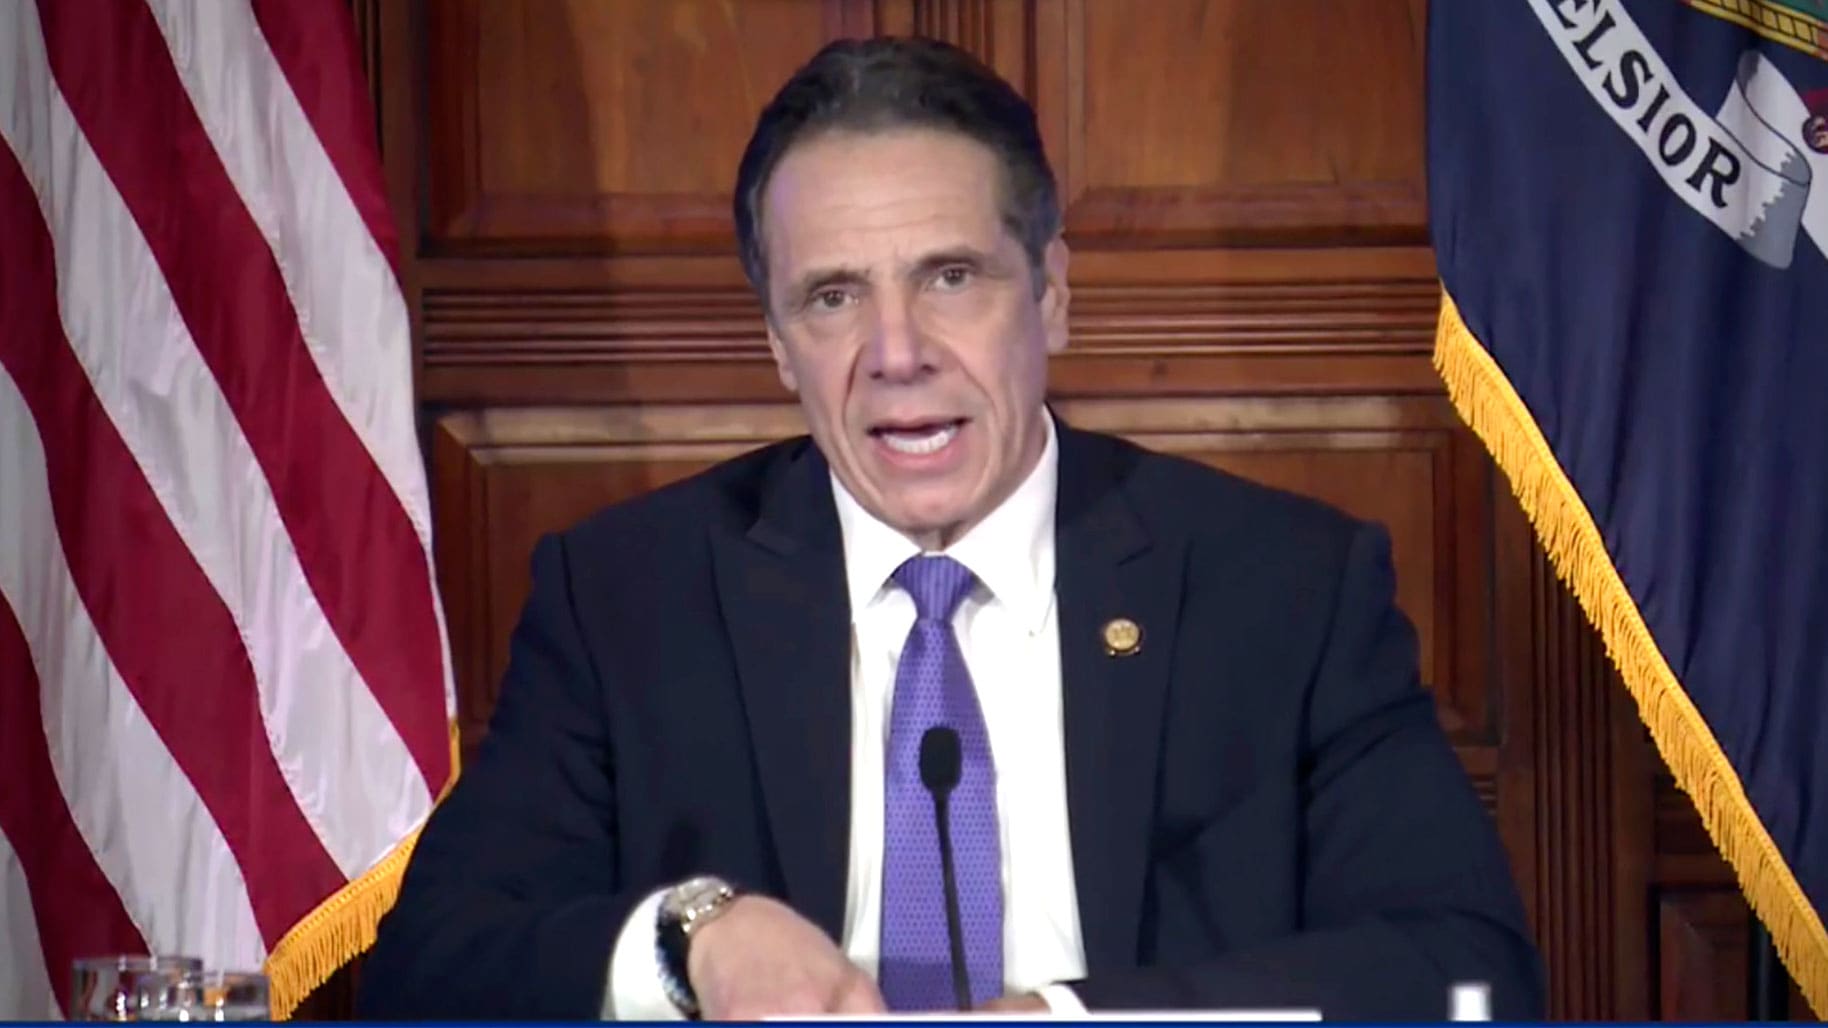 Governor Andrew Cuomo refuses to step down on sexual harassment charges